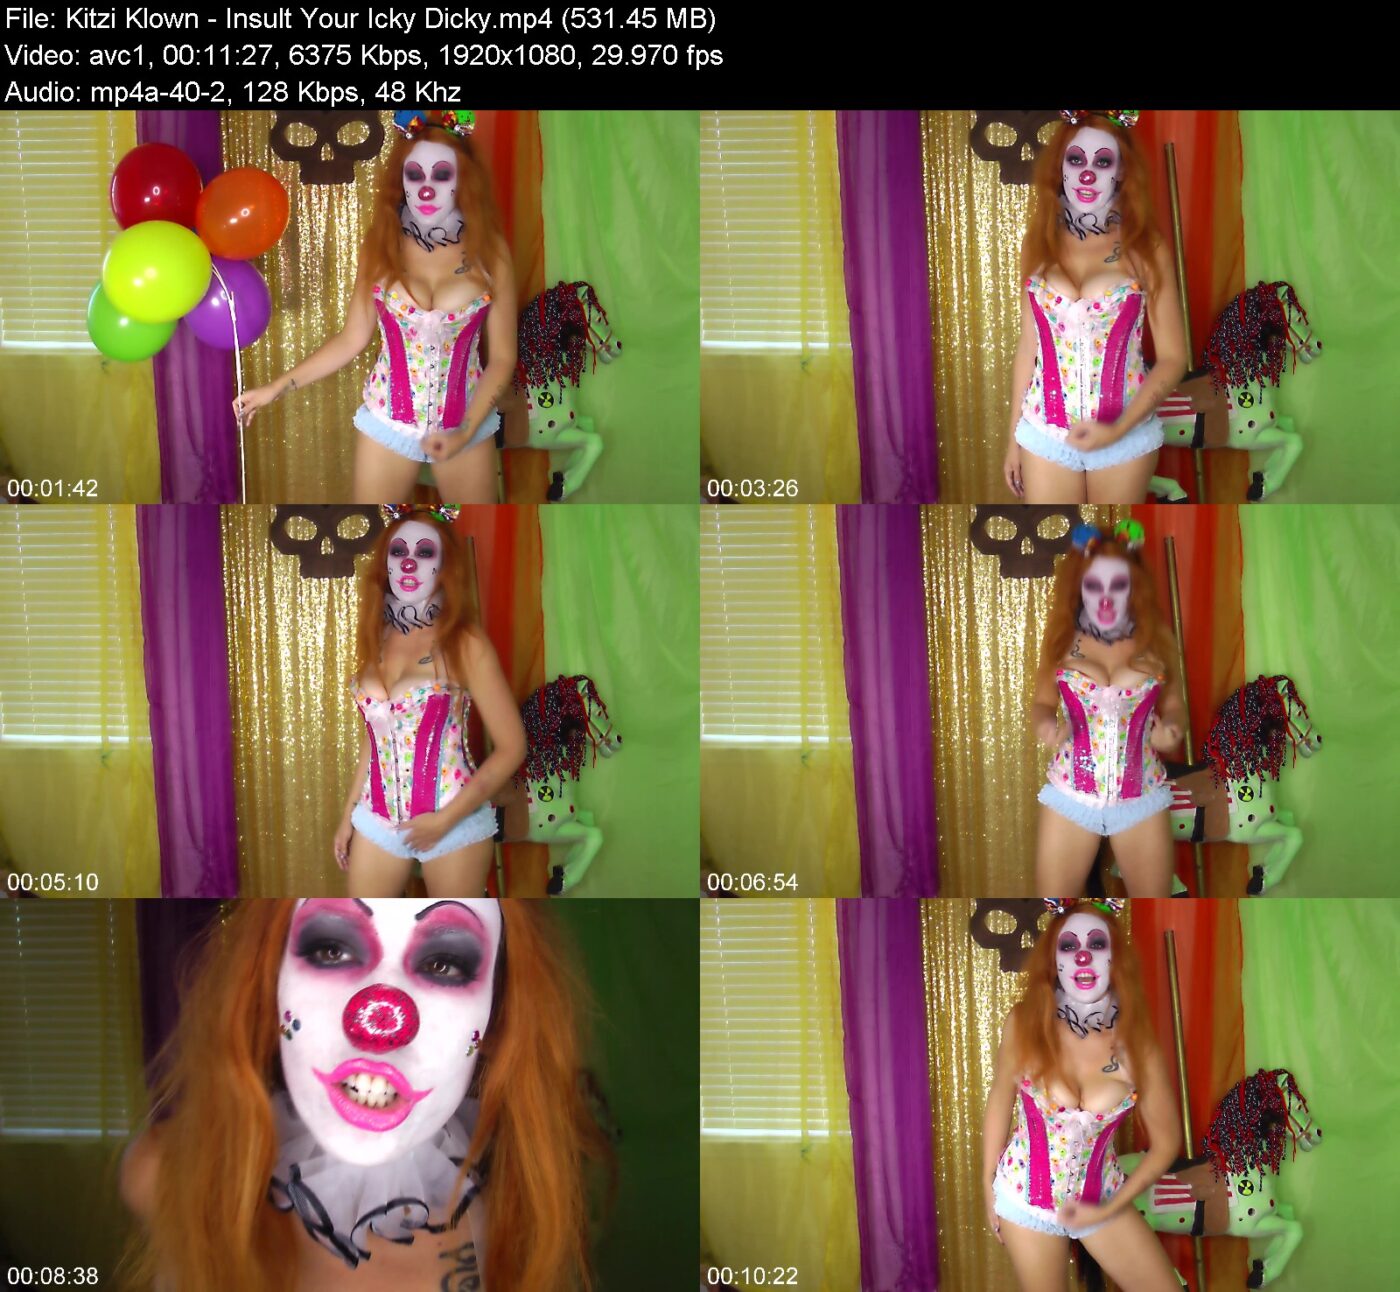 Kitzi Klown - Insult Your Icky Dicky